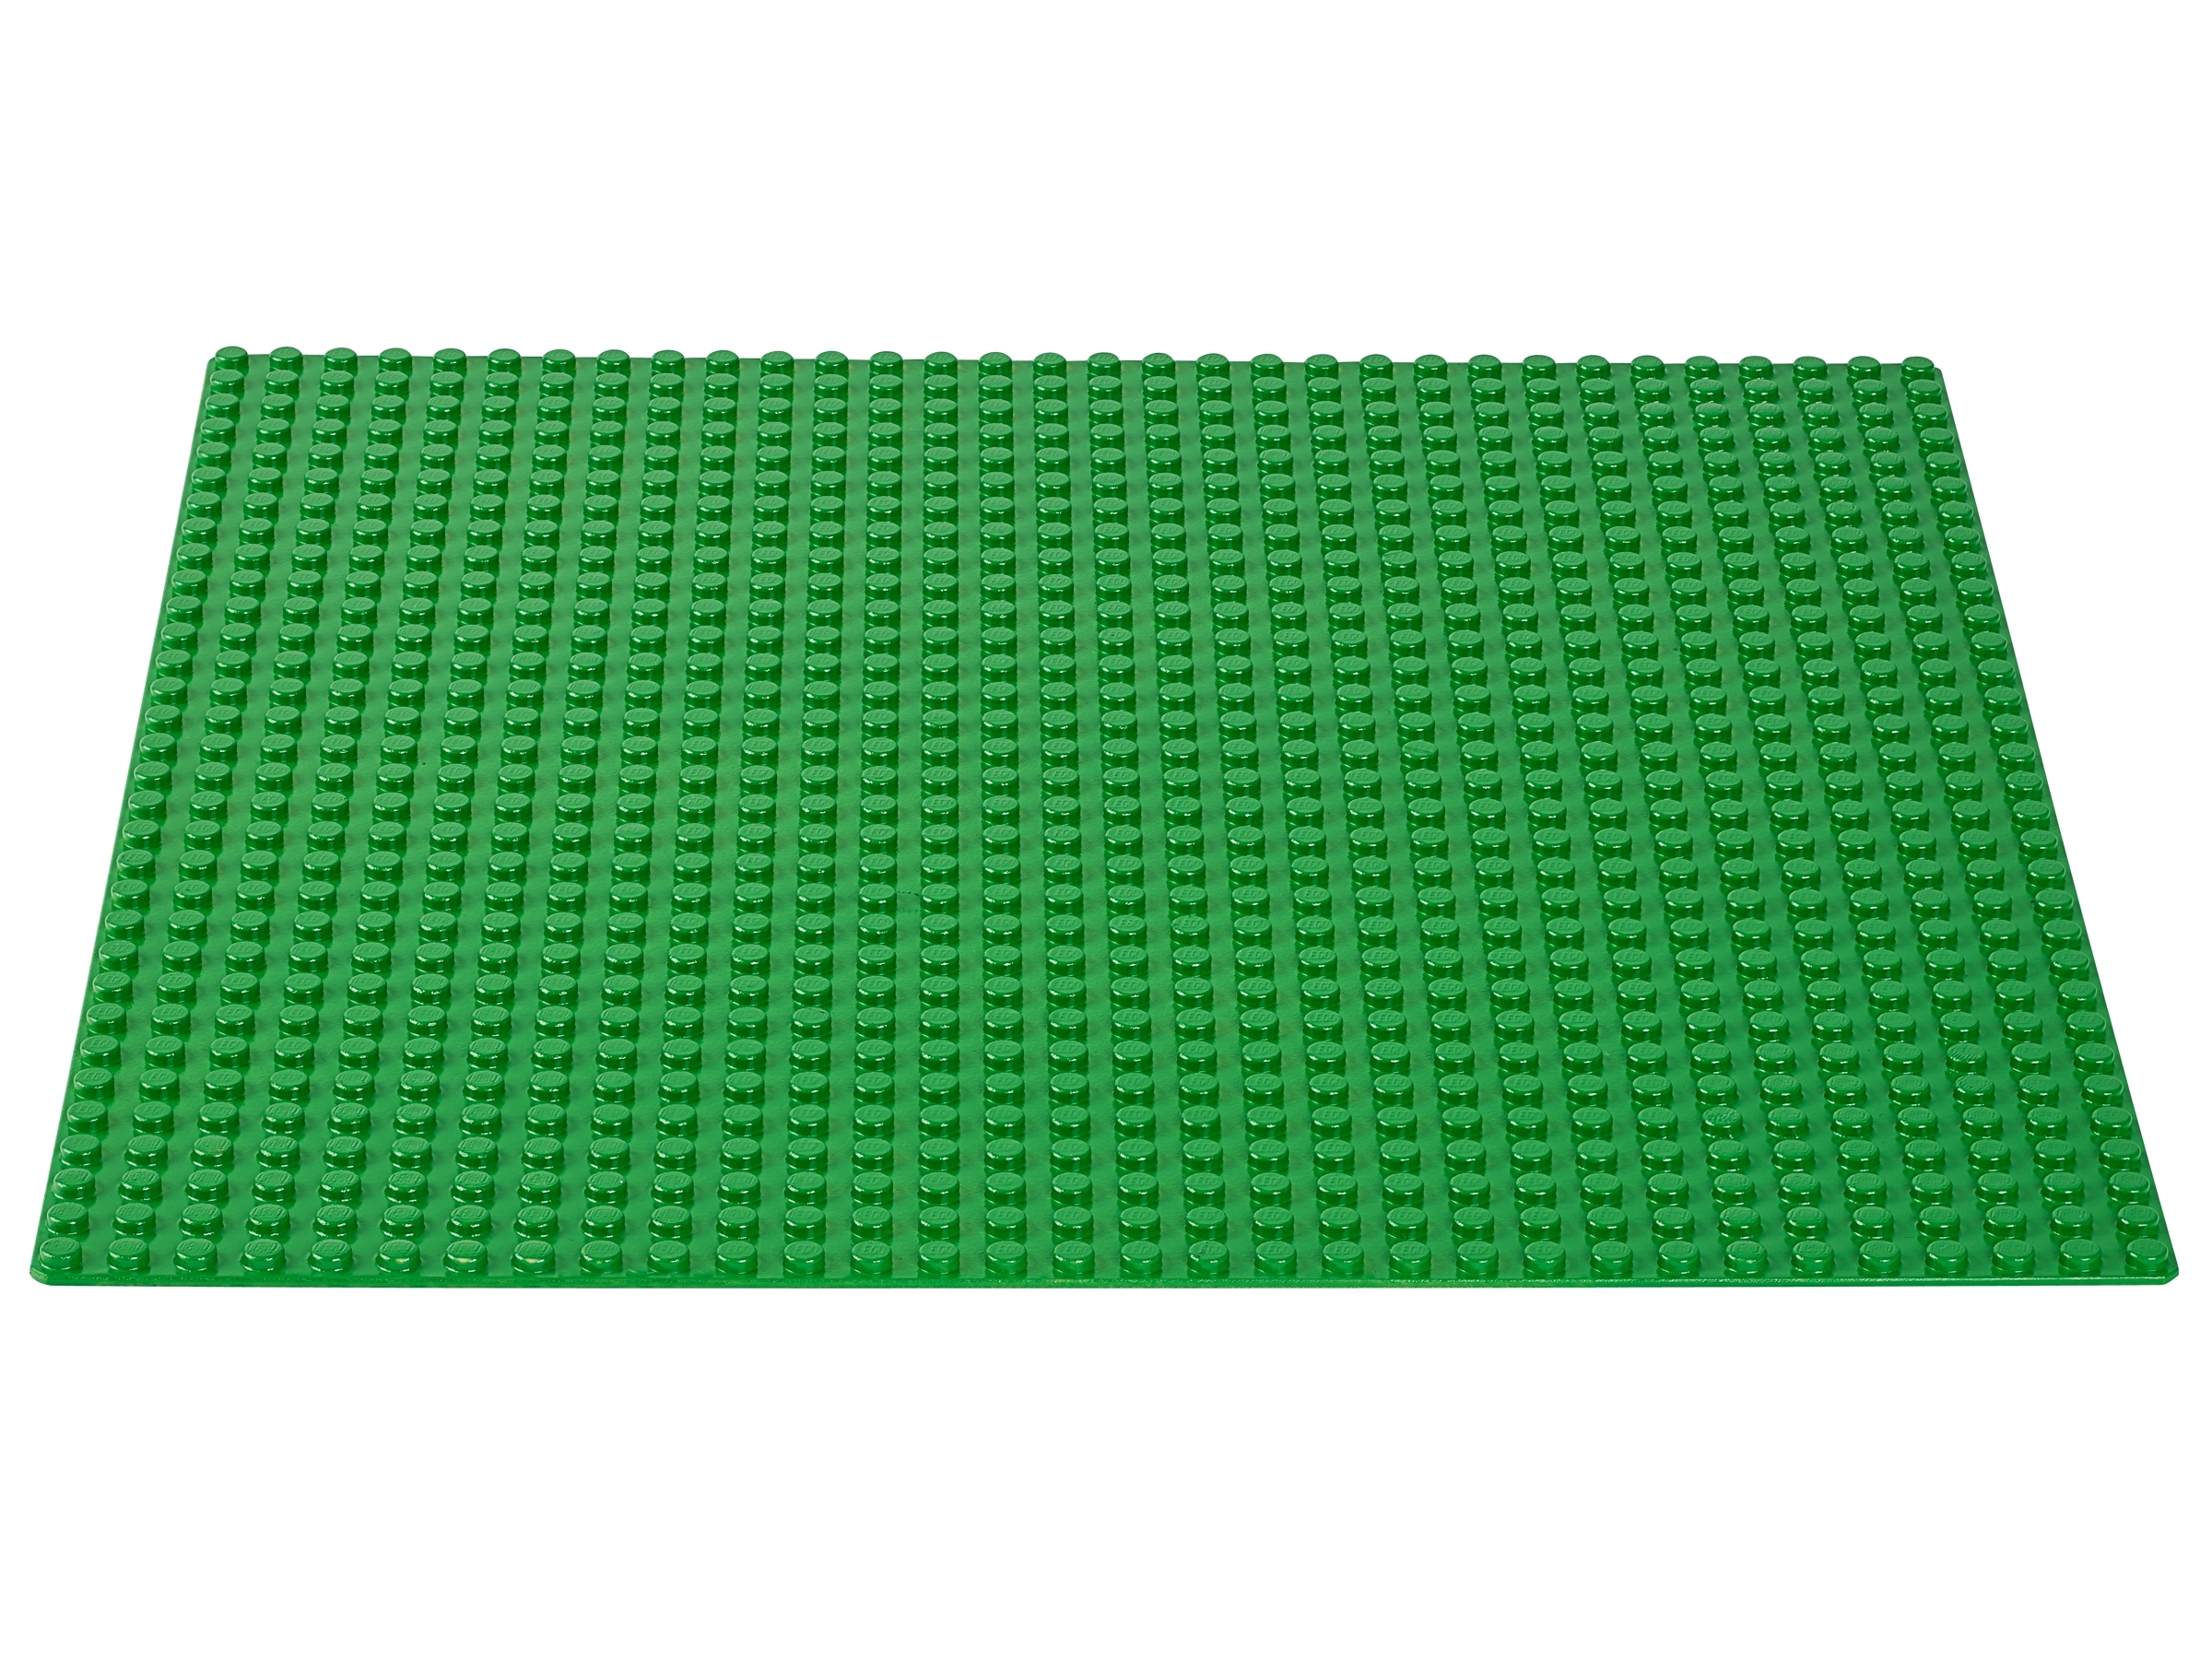 30/" by 40/" overall 12-10/" Lego base plates